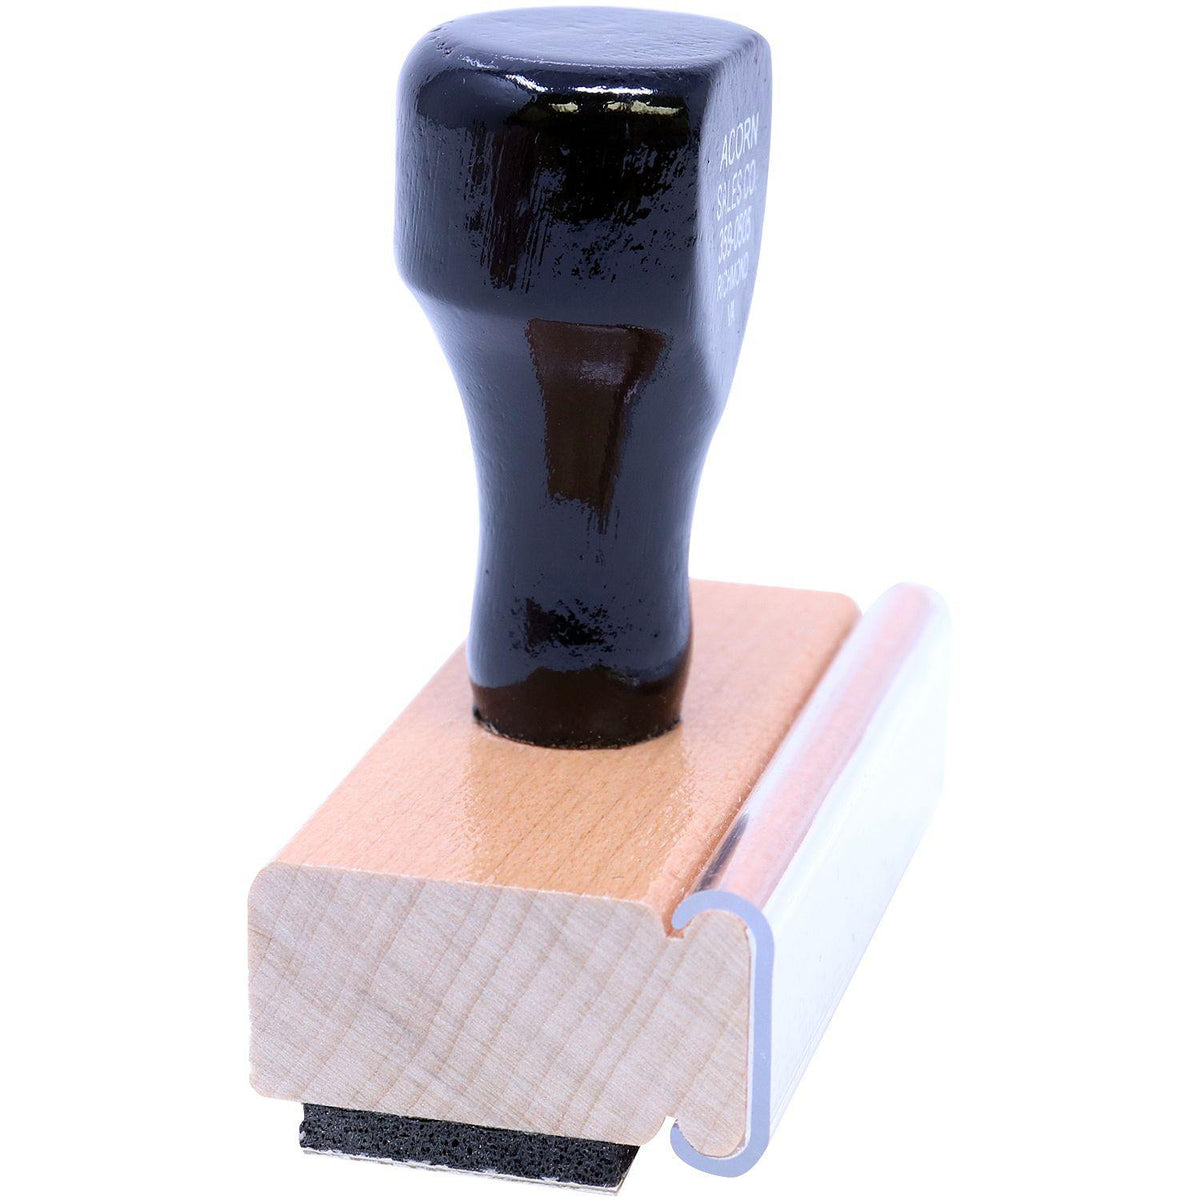 Please Pay Now No Statements Rubber Stamp - Engineer Seal Stamps - Brand_Acorn, Impression Size_Small, Stamp Type_Regular Stamp, Type of Use_Finance, Type of Use_Office